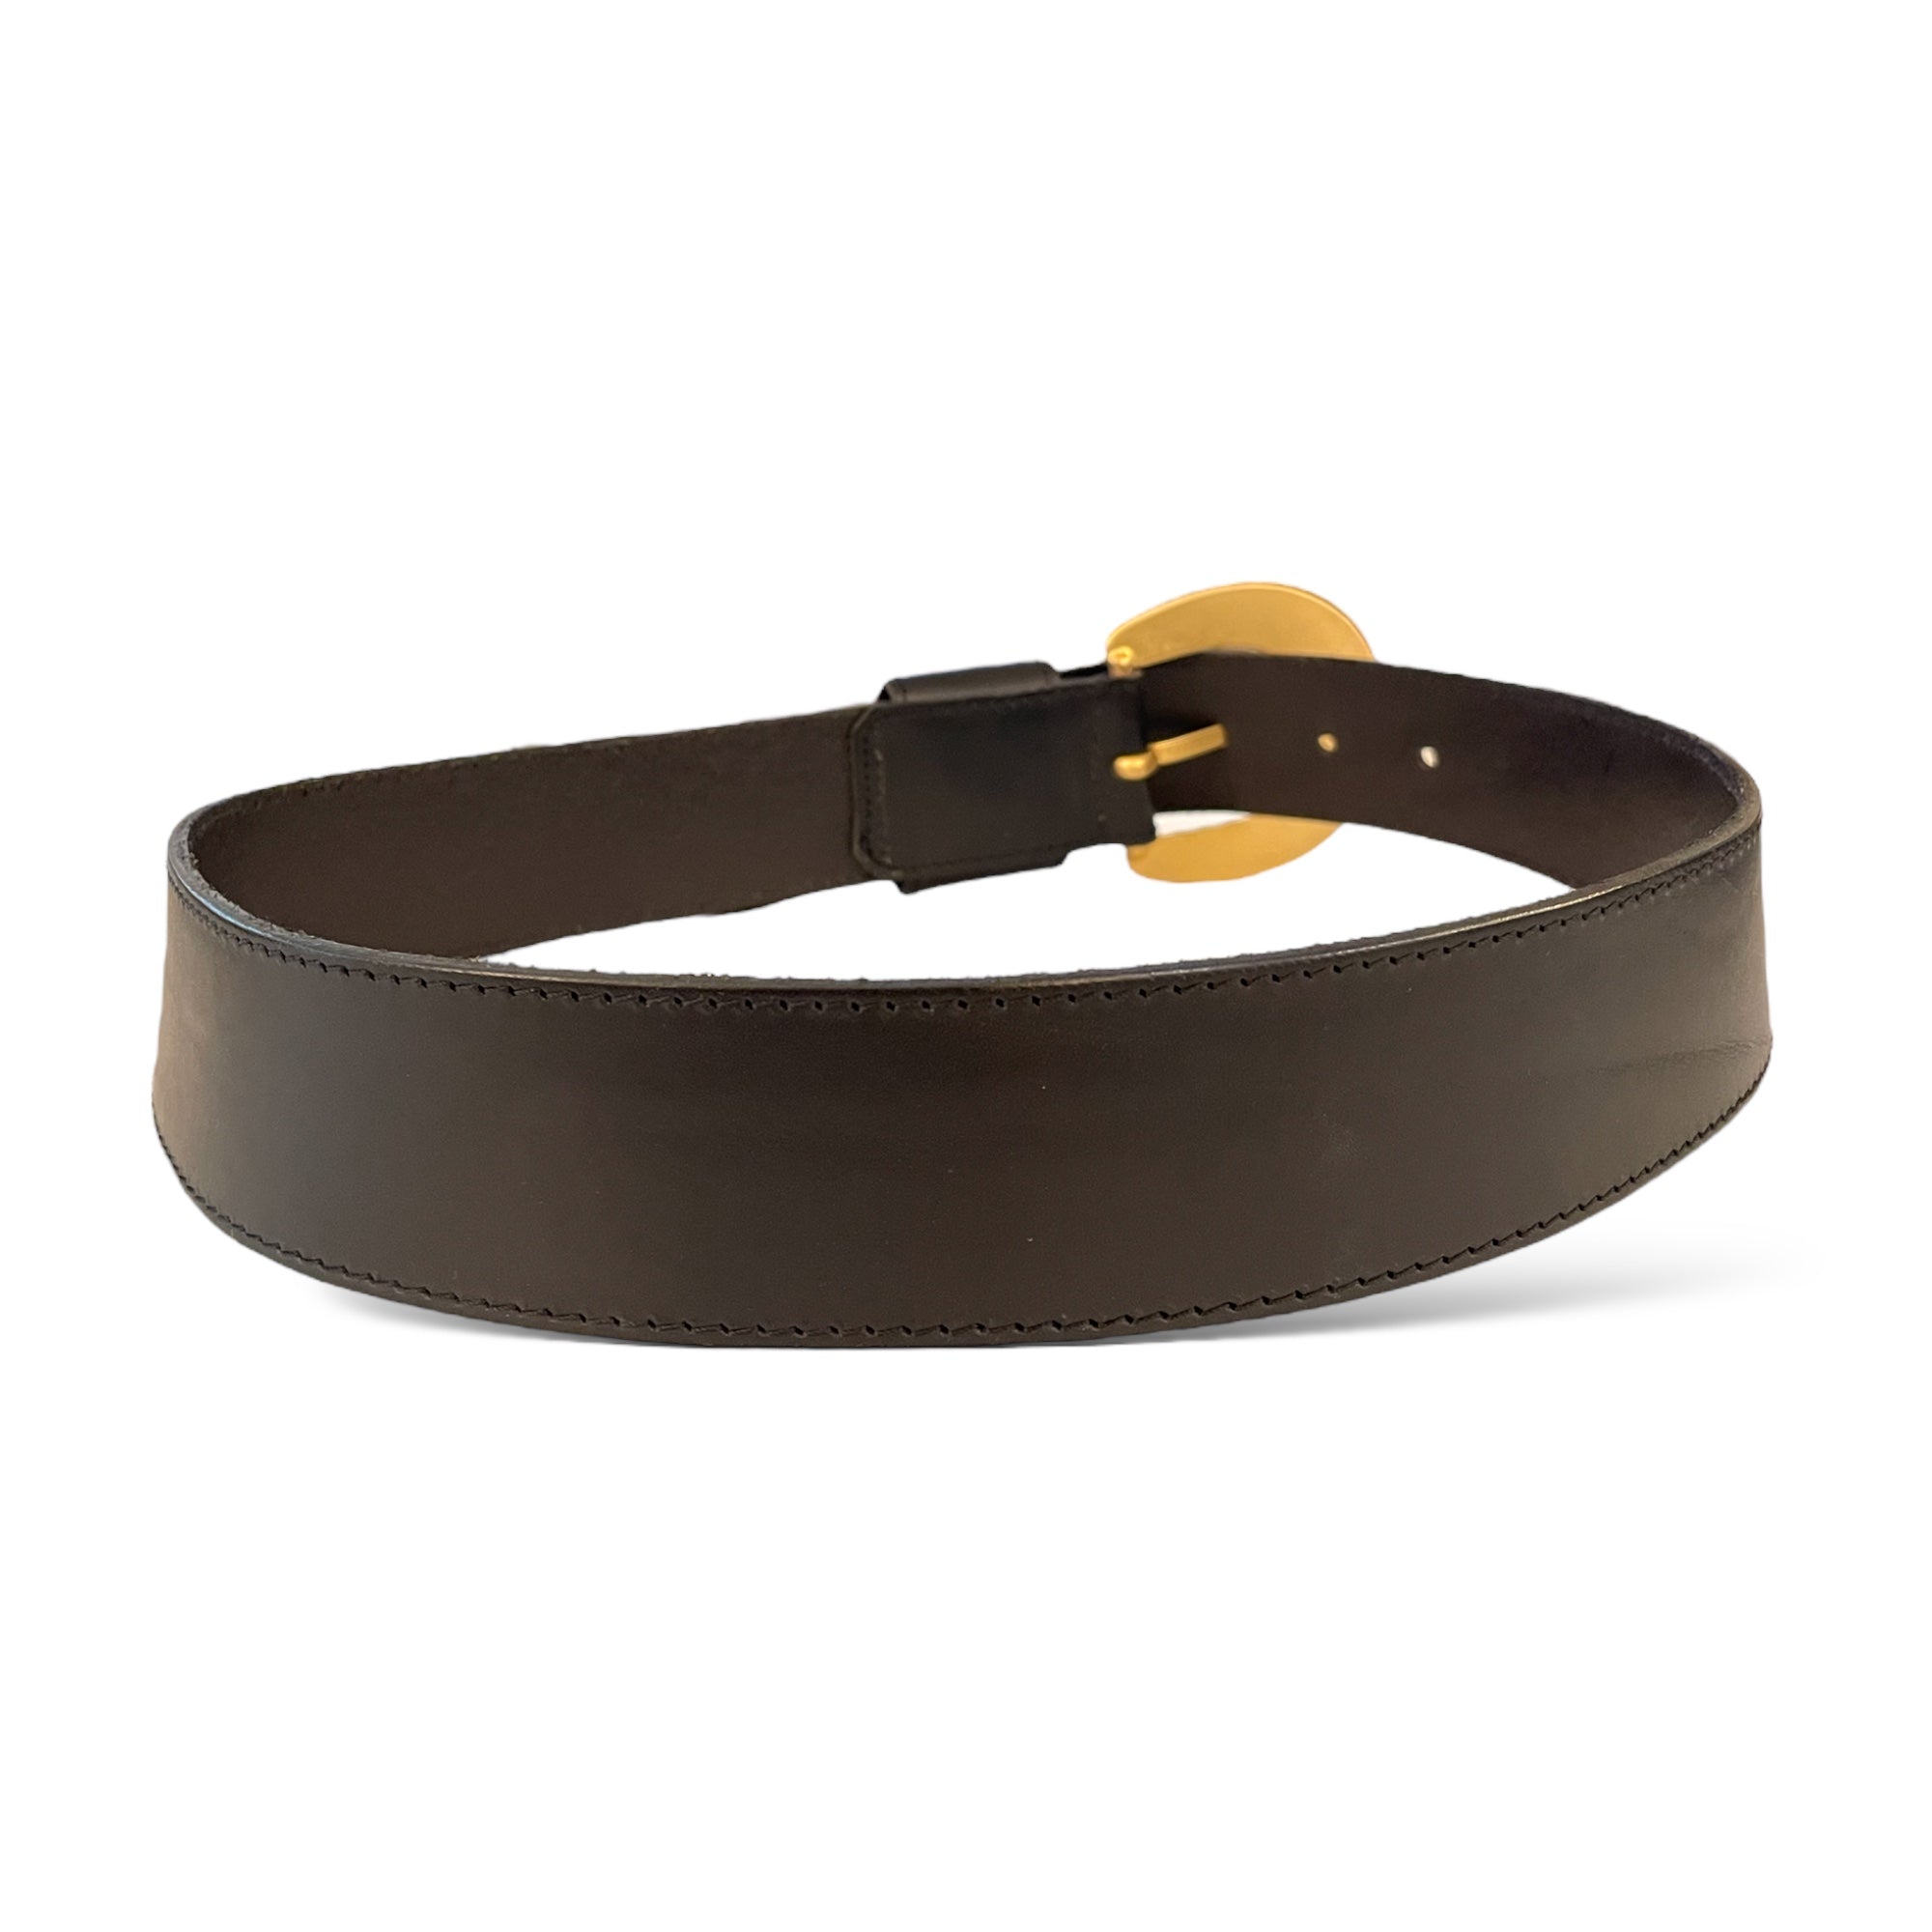 DANA BUCHMAN Made in Italy Black Leather Belt with Brushed Gold Buckle